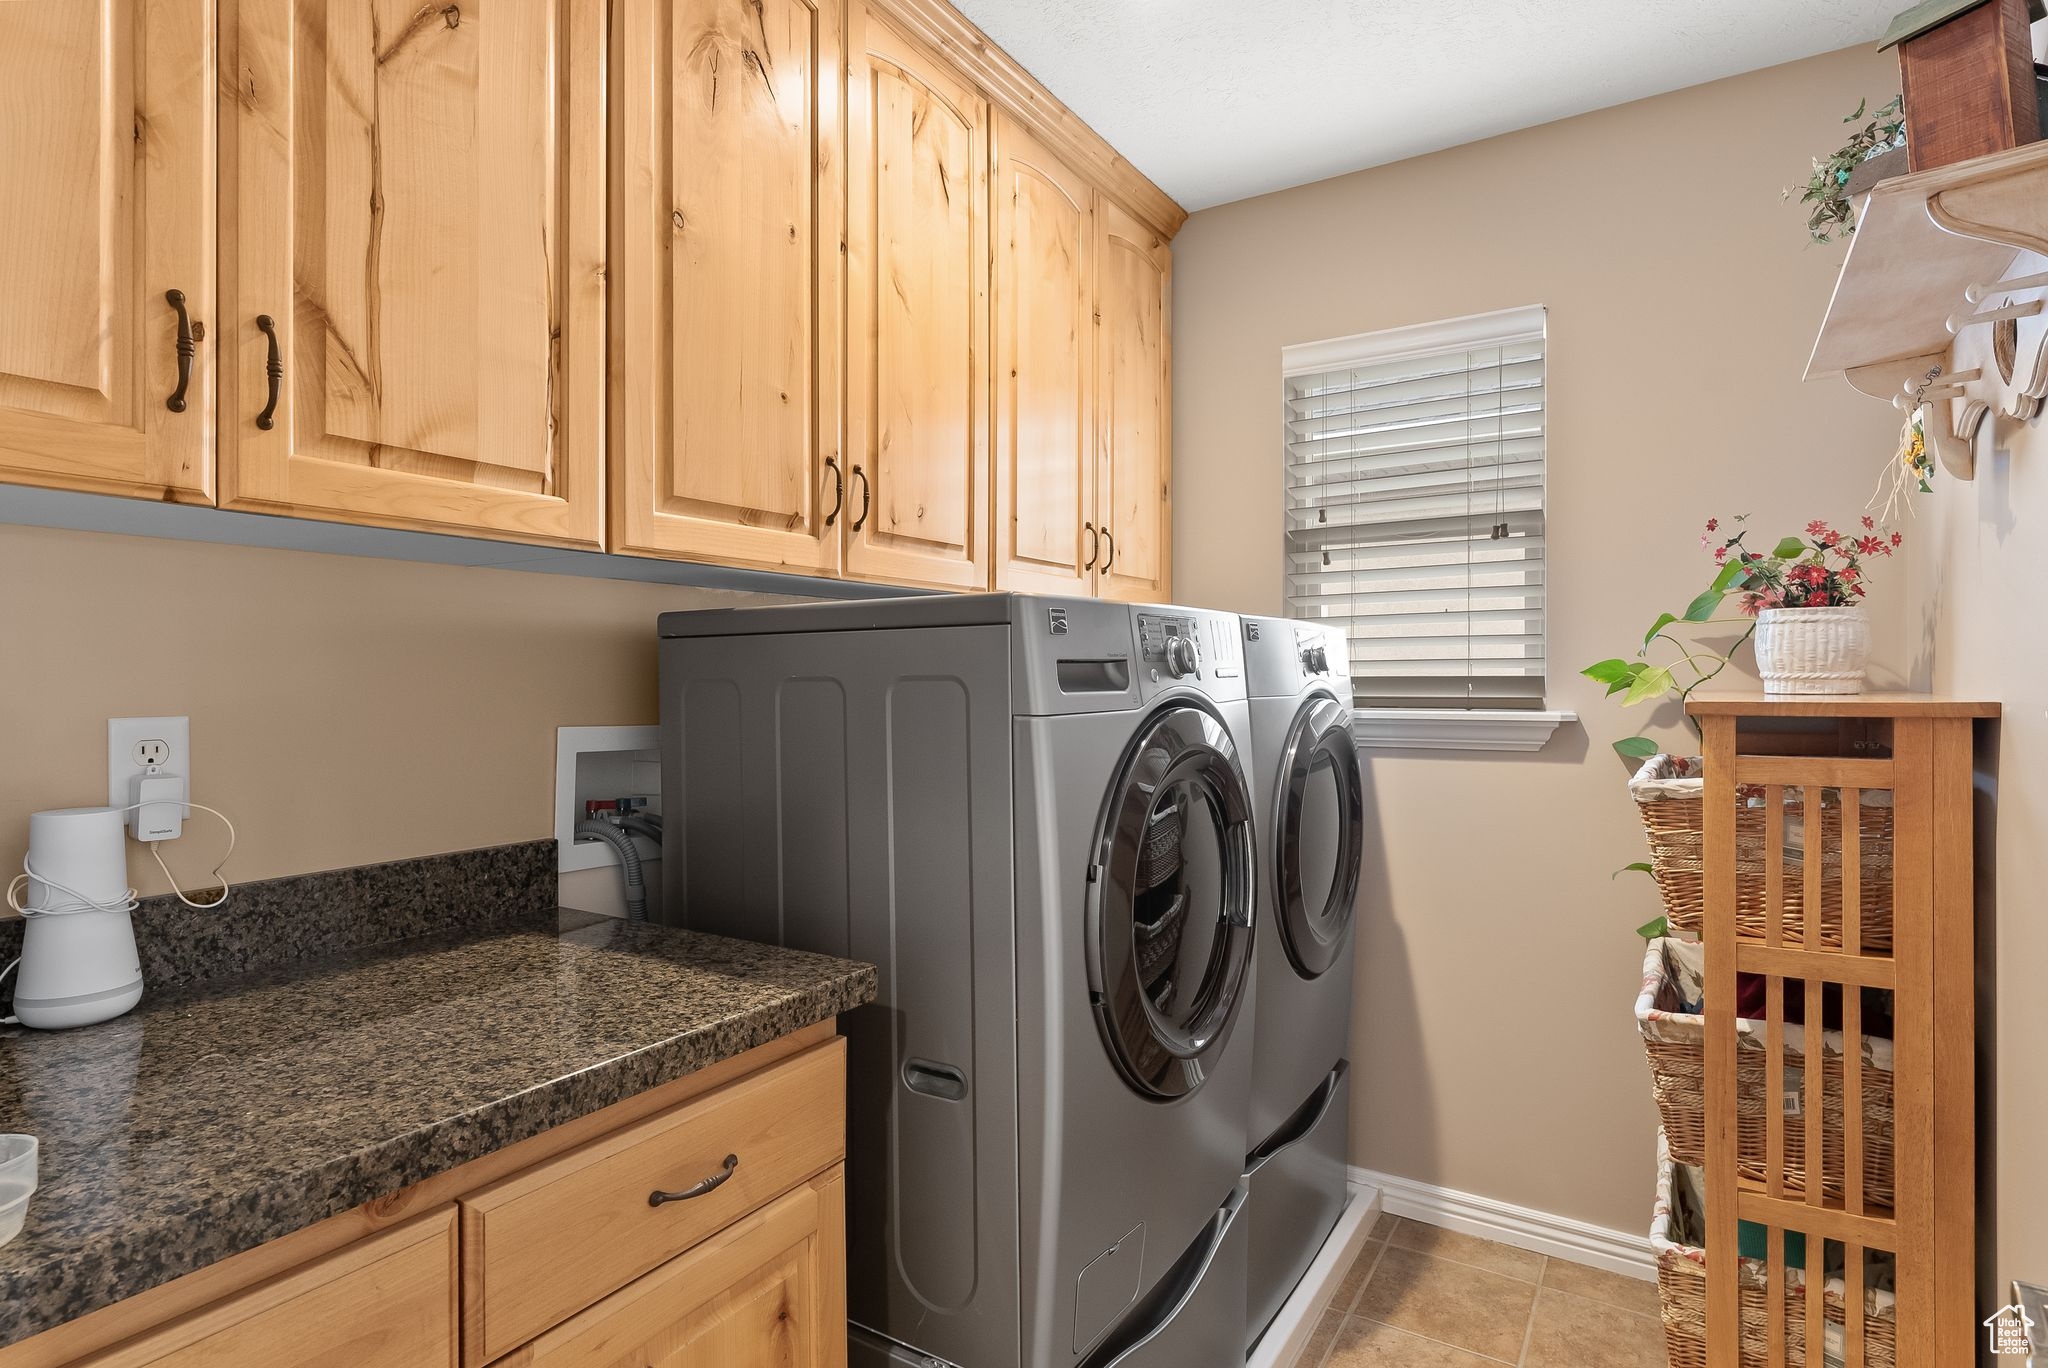 Laundry room featuring washing machine and clothes dryer, cabinets, light tile floors, and hookup for a washing machine